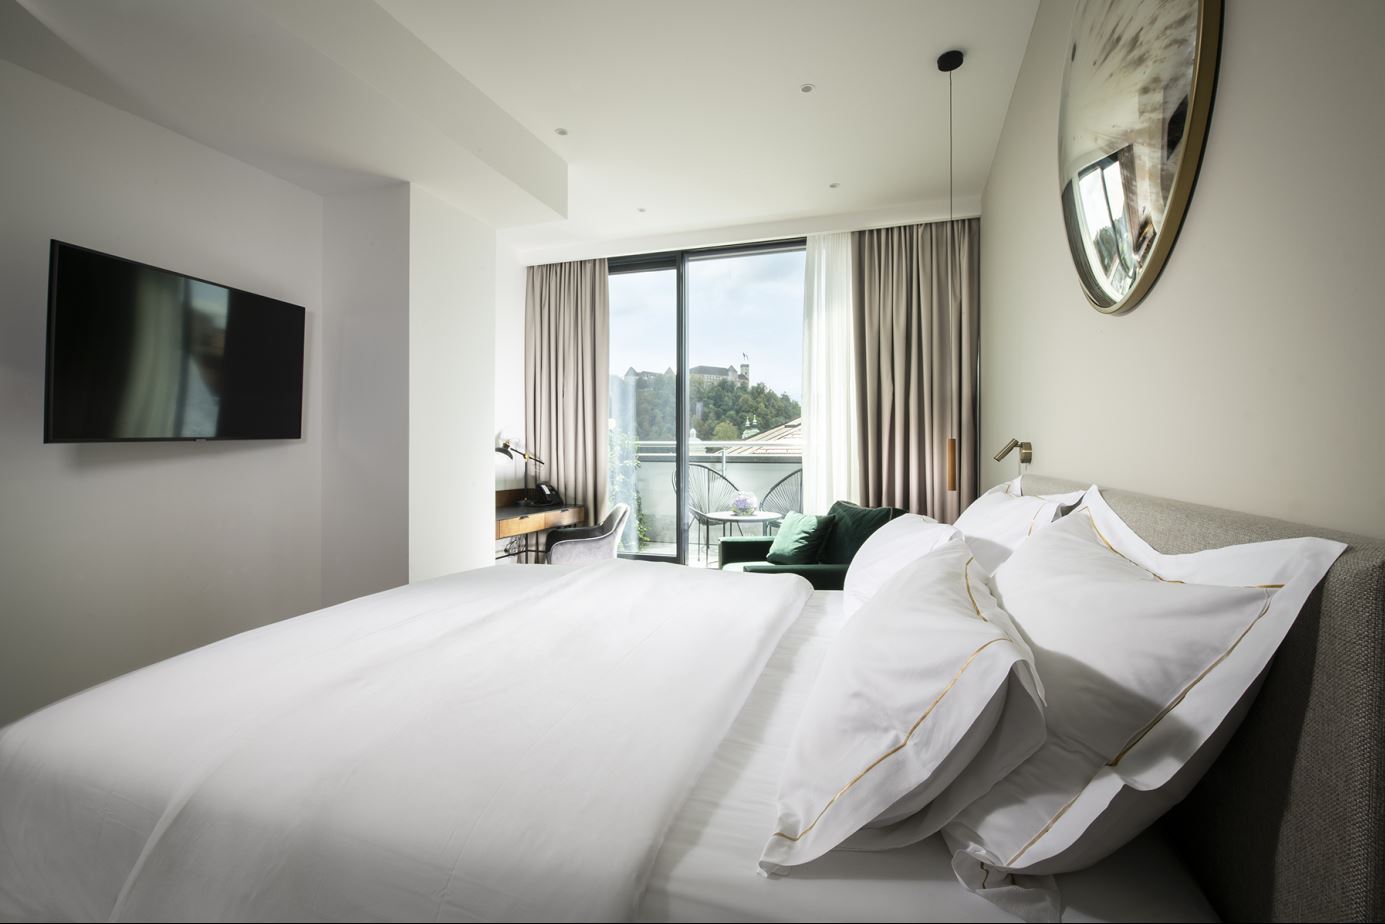 Welcome to the brand new Deluxe Terrace rooms and Above the City suite with stunning Ljubljana views